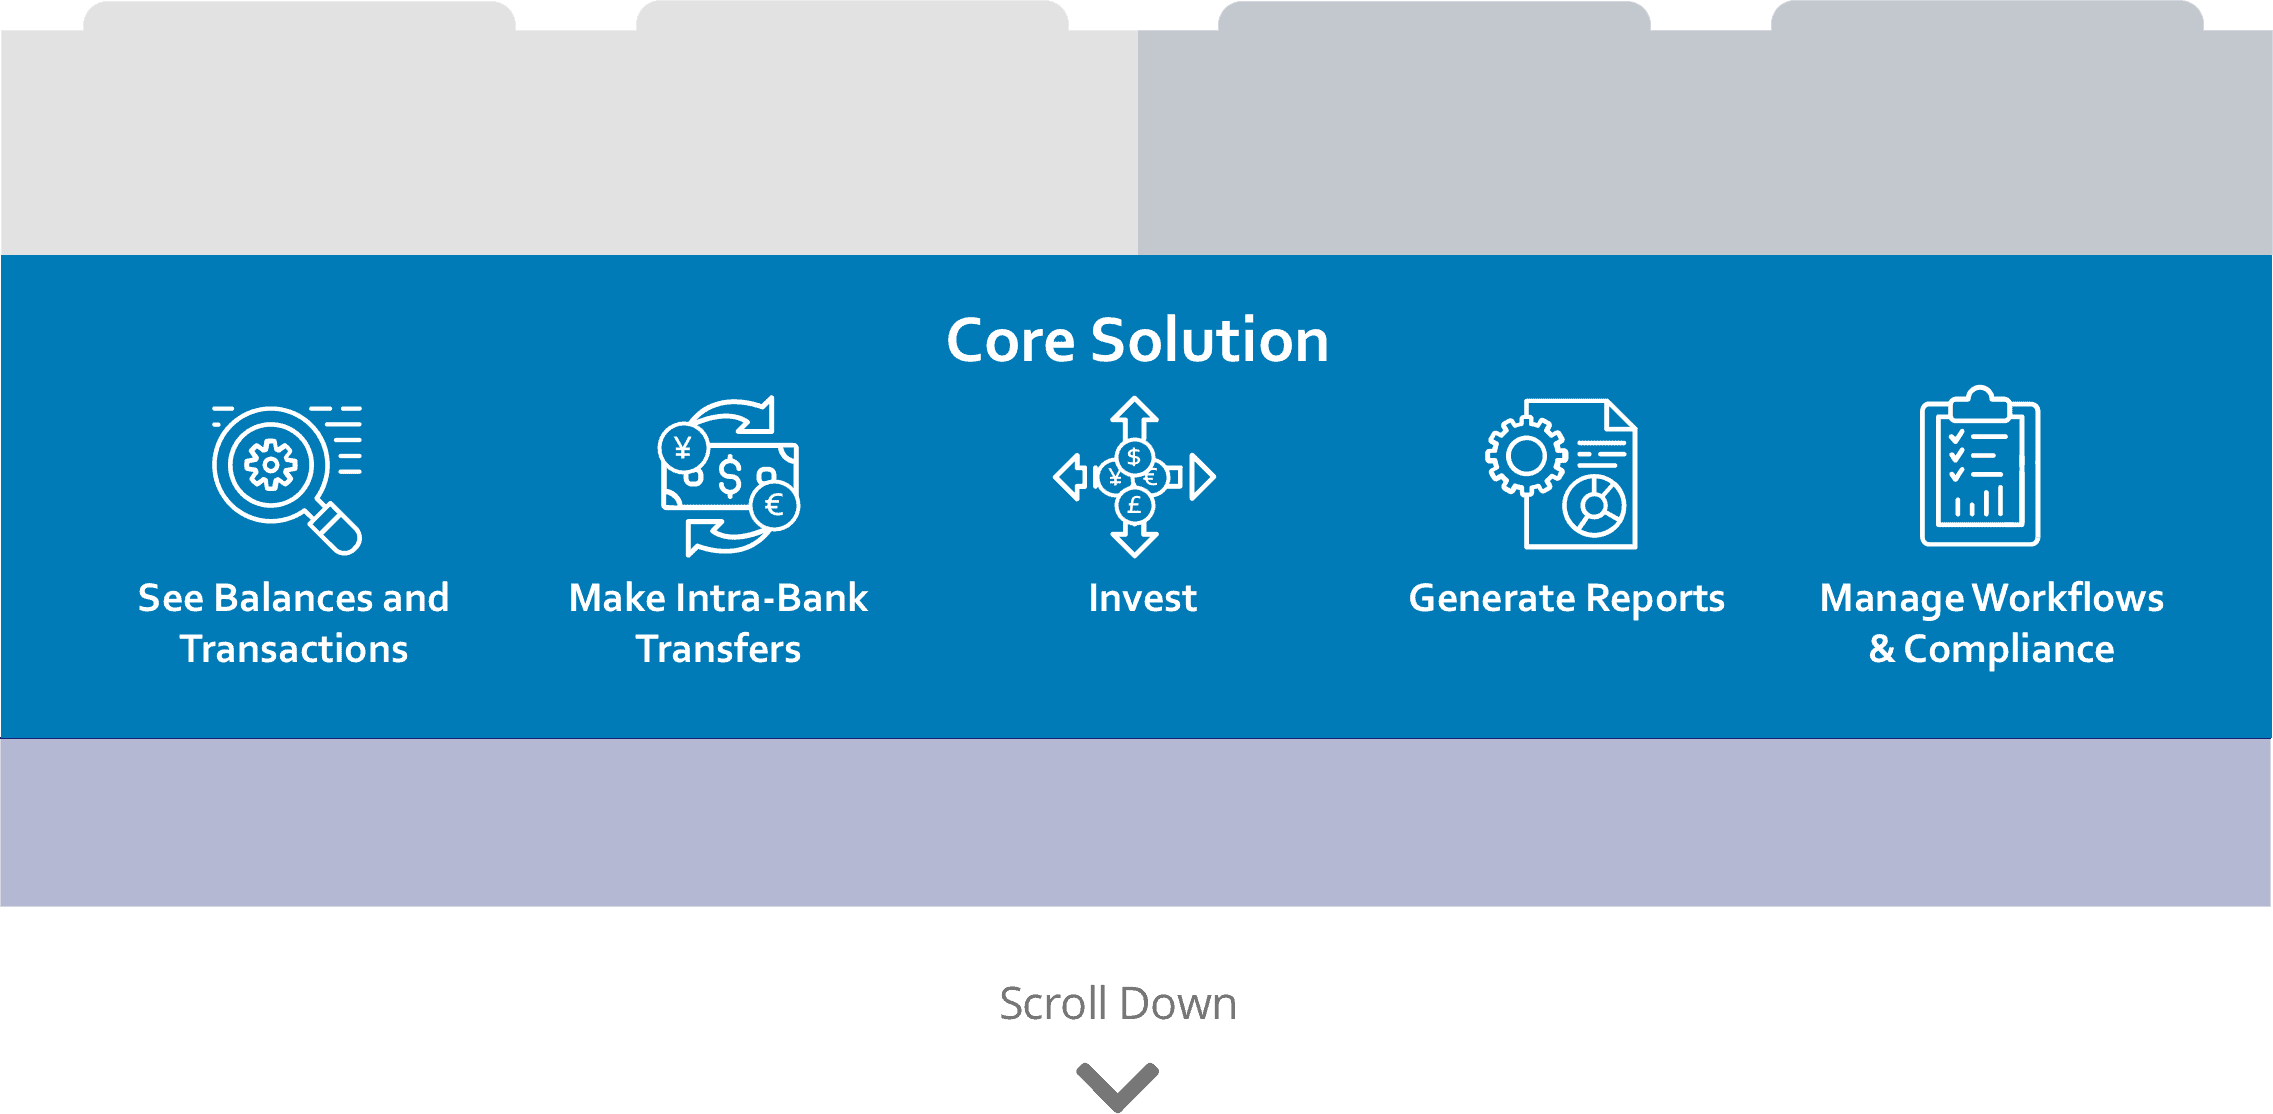 Treasury Curve Core Solution: see balances and transactions; make intra-bank transfers; invest; generate reports; manage workflows and compliance